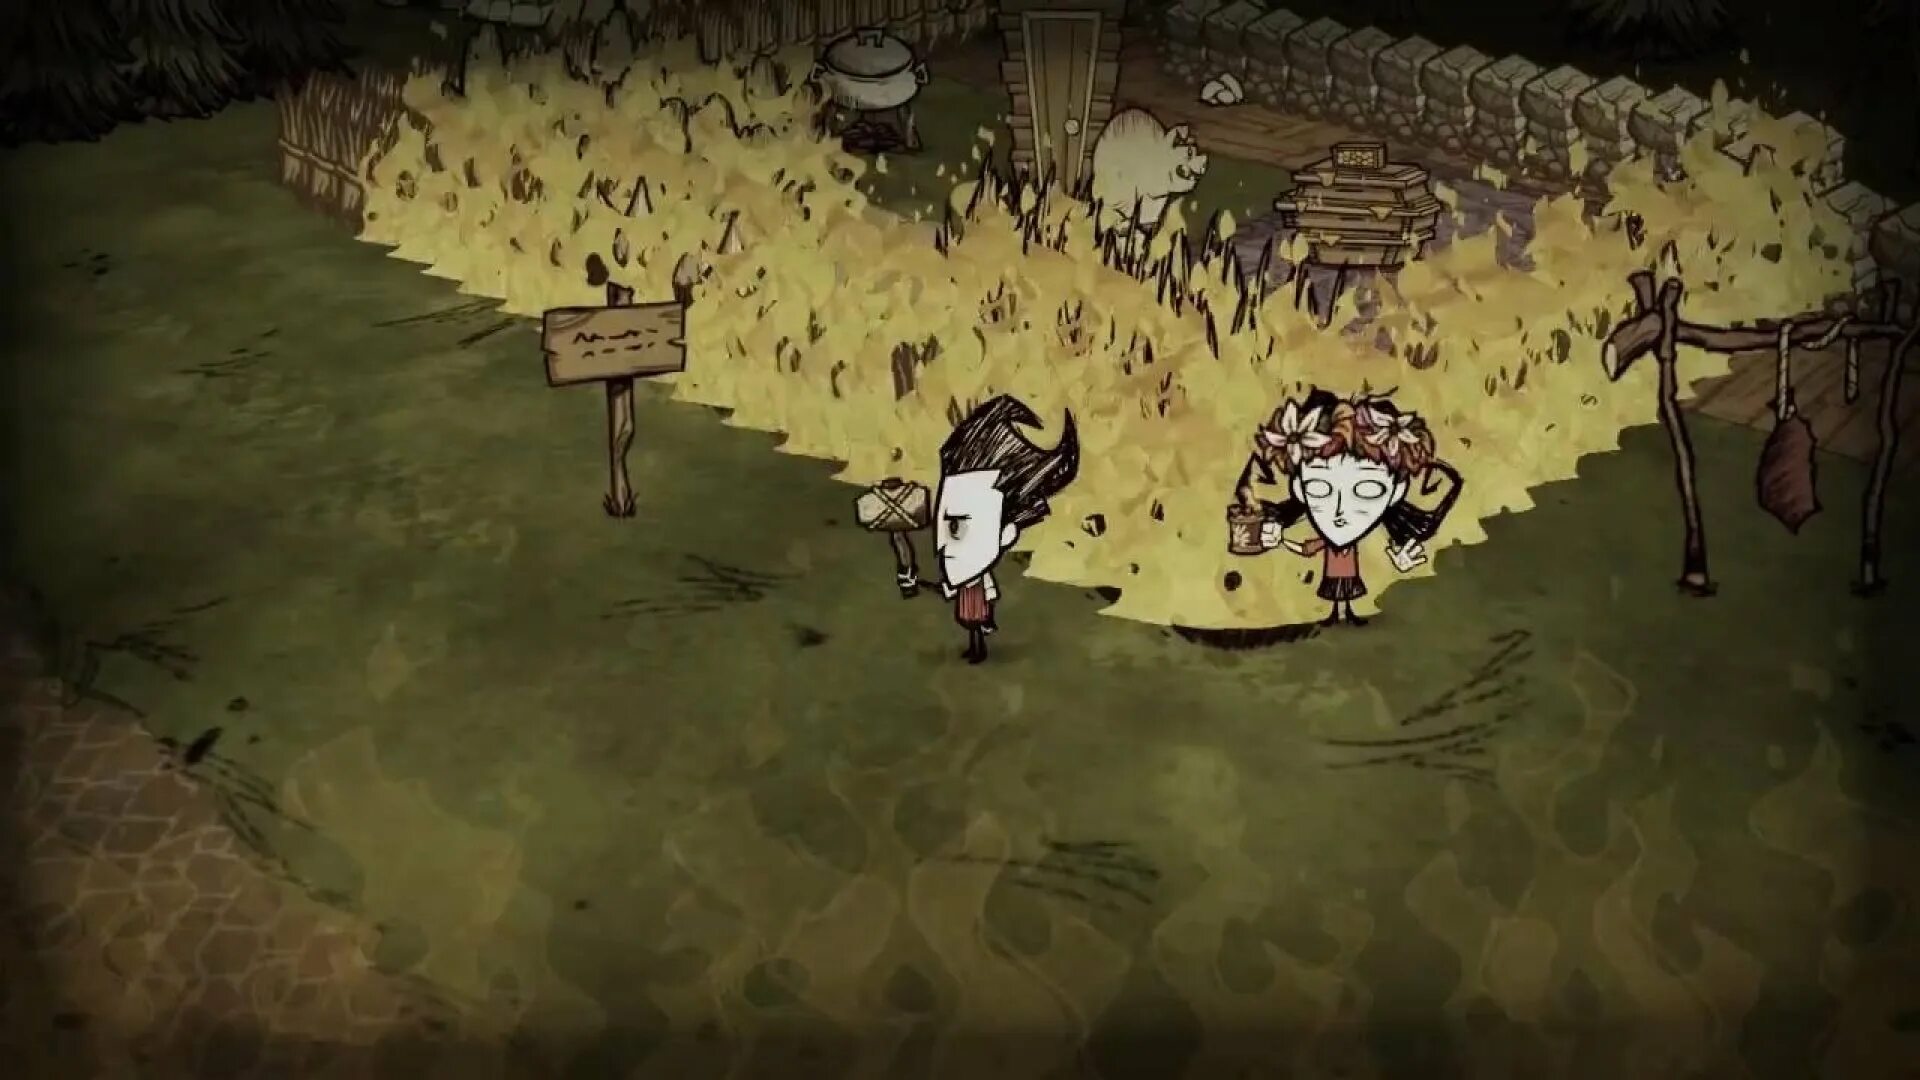 Don't Starve together. Don t Starve игра. Донт старв тугезер. Don't Starve джунгли.